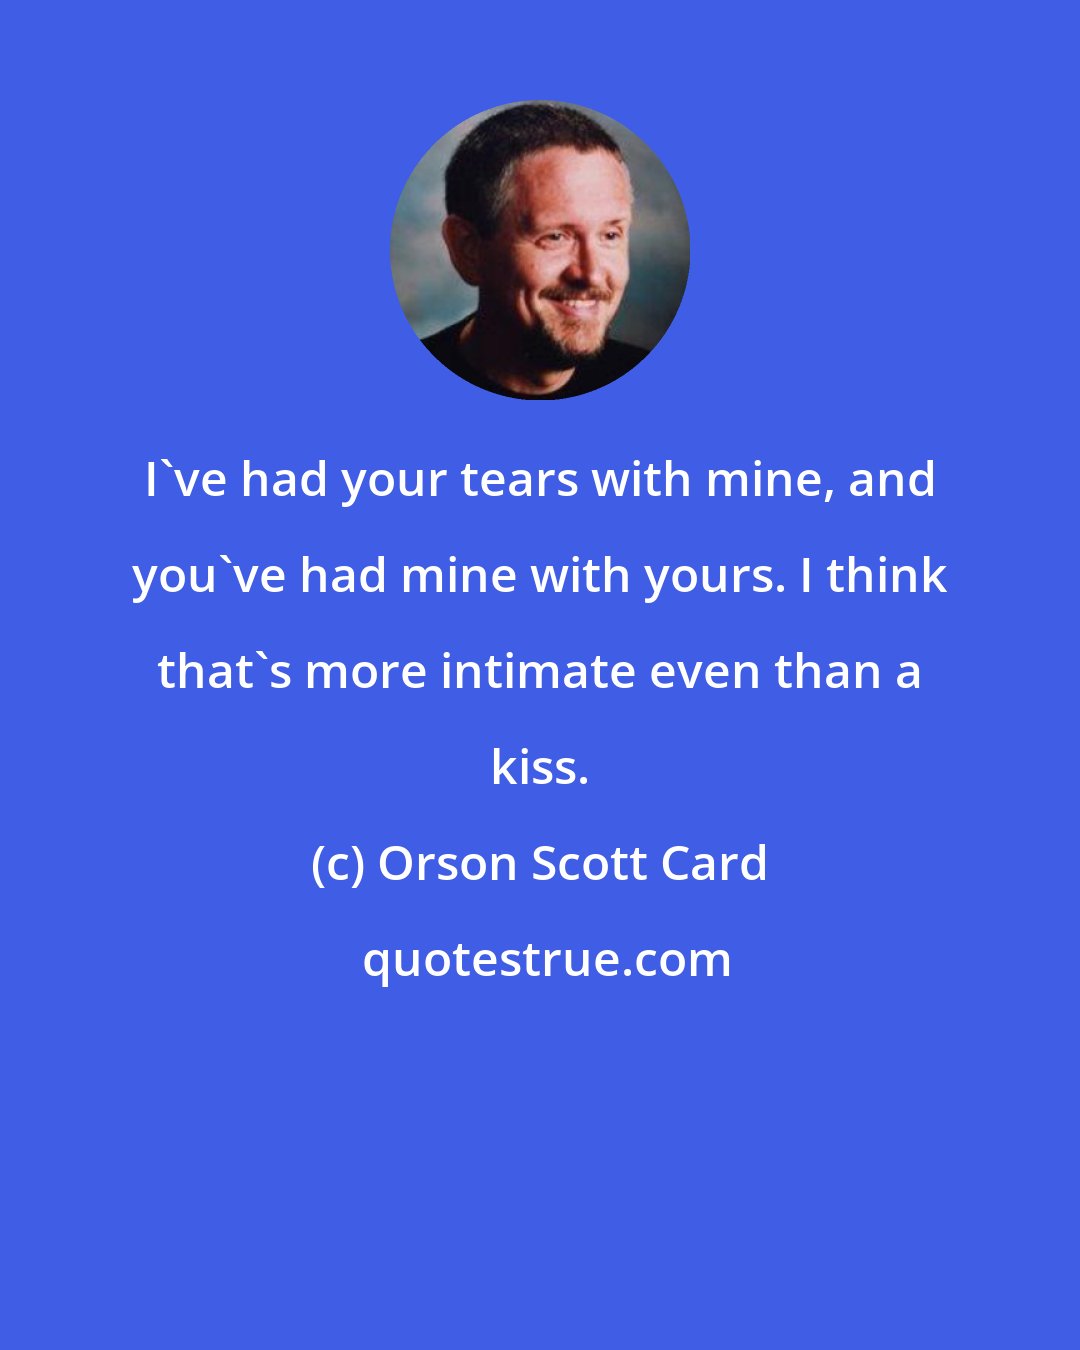 Orson Scott Card: I've had your tears with mine, and you've had mine with yours. I think that's more intimate even than a kiss.